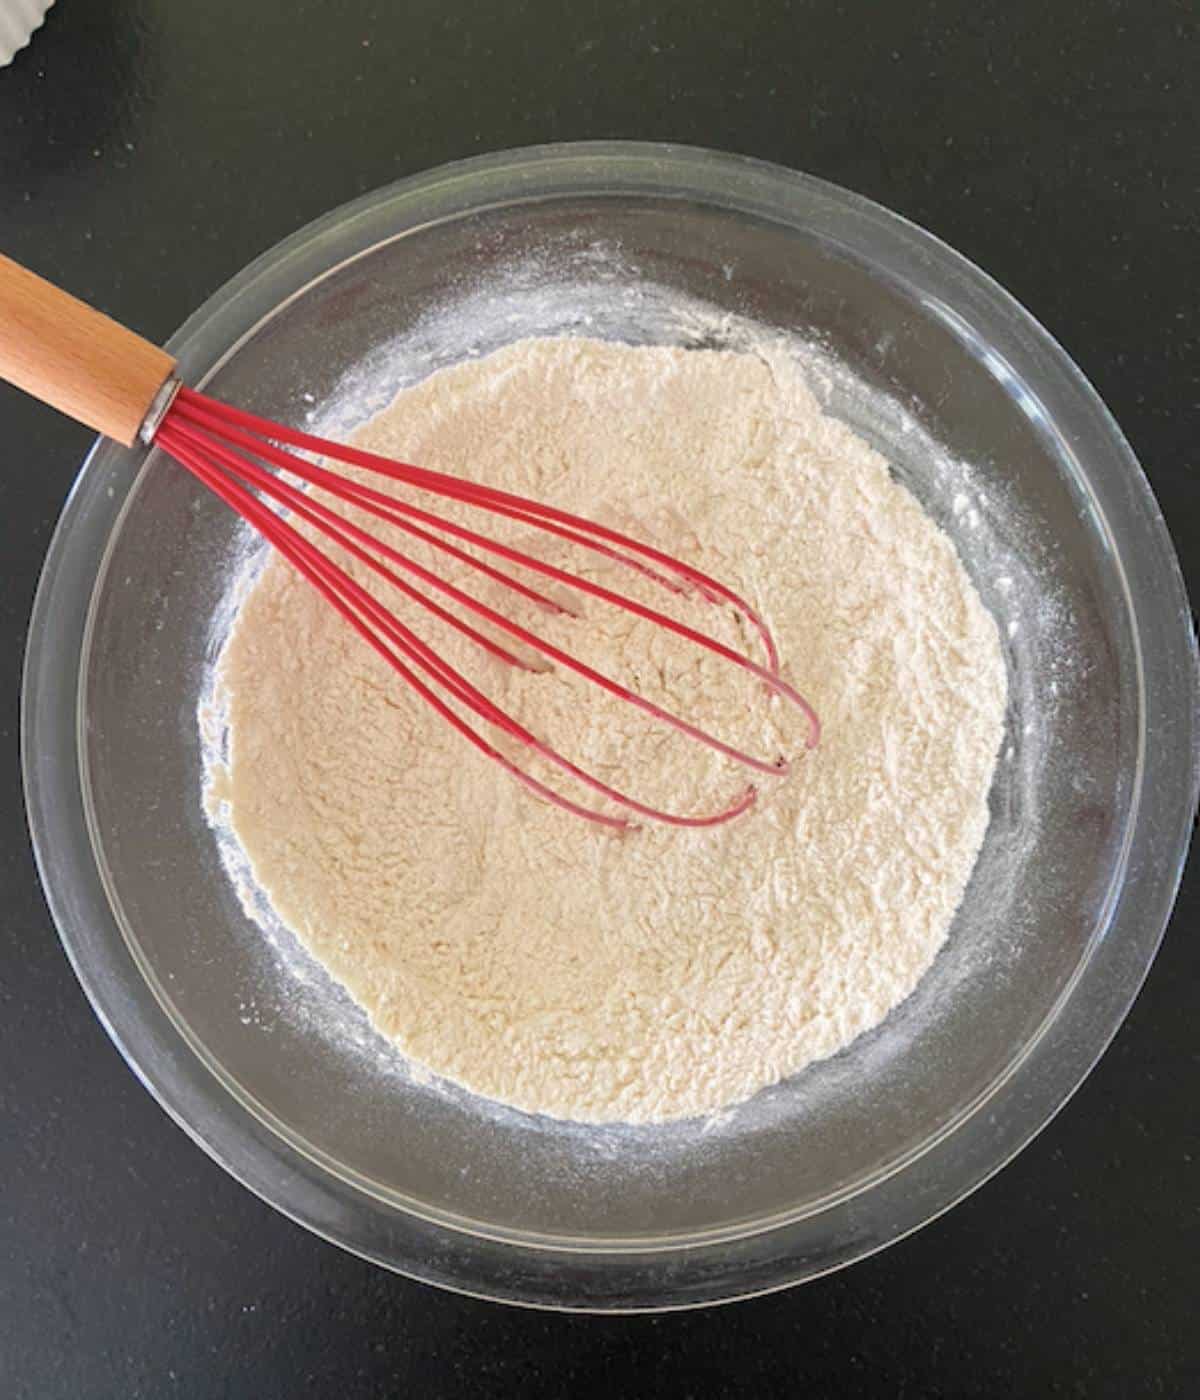 Dry ingredients in glass bowl with red whisk.